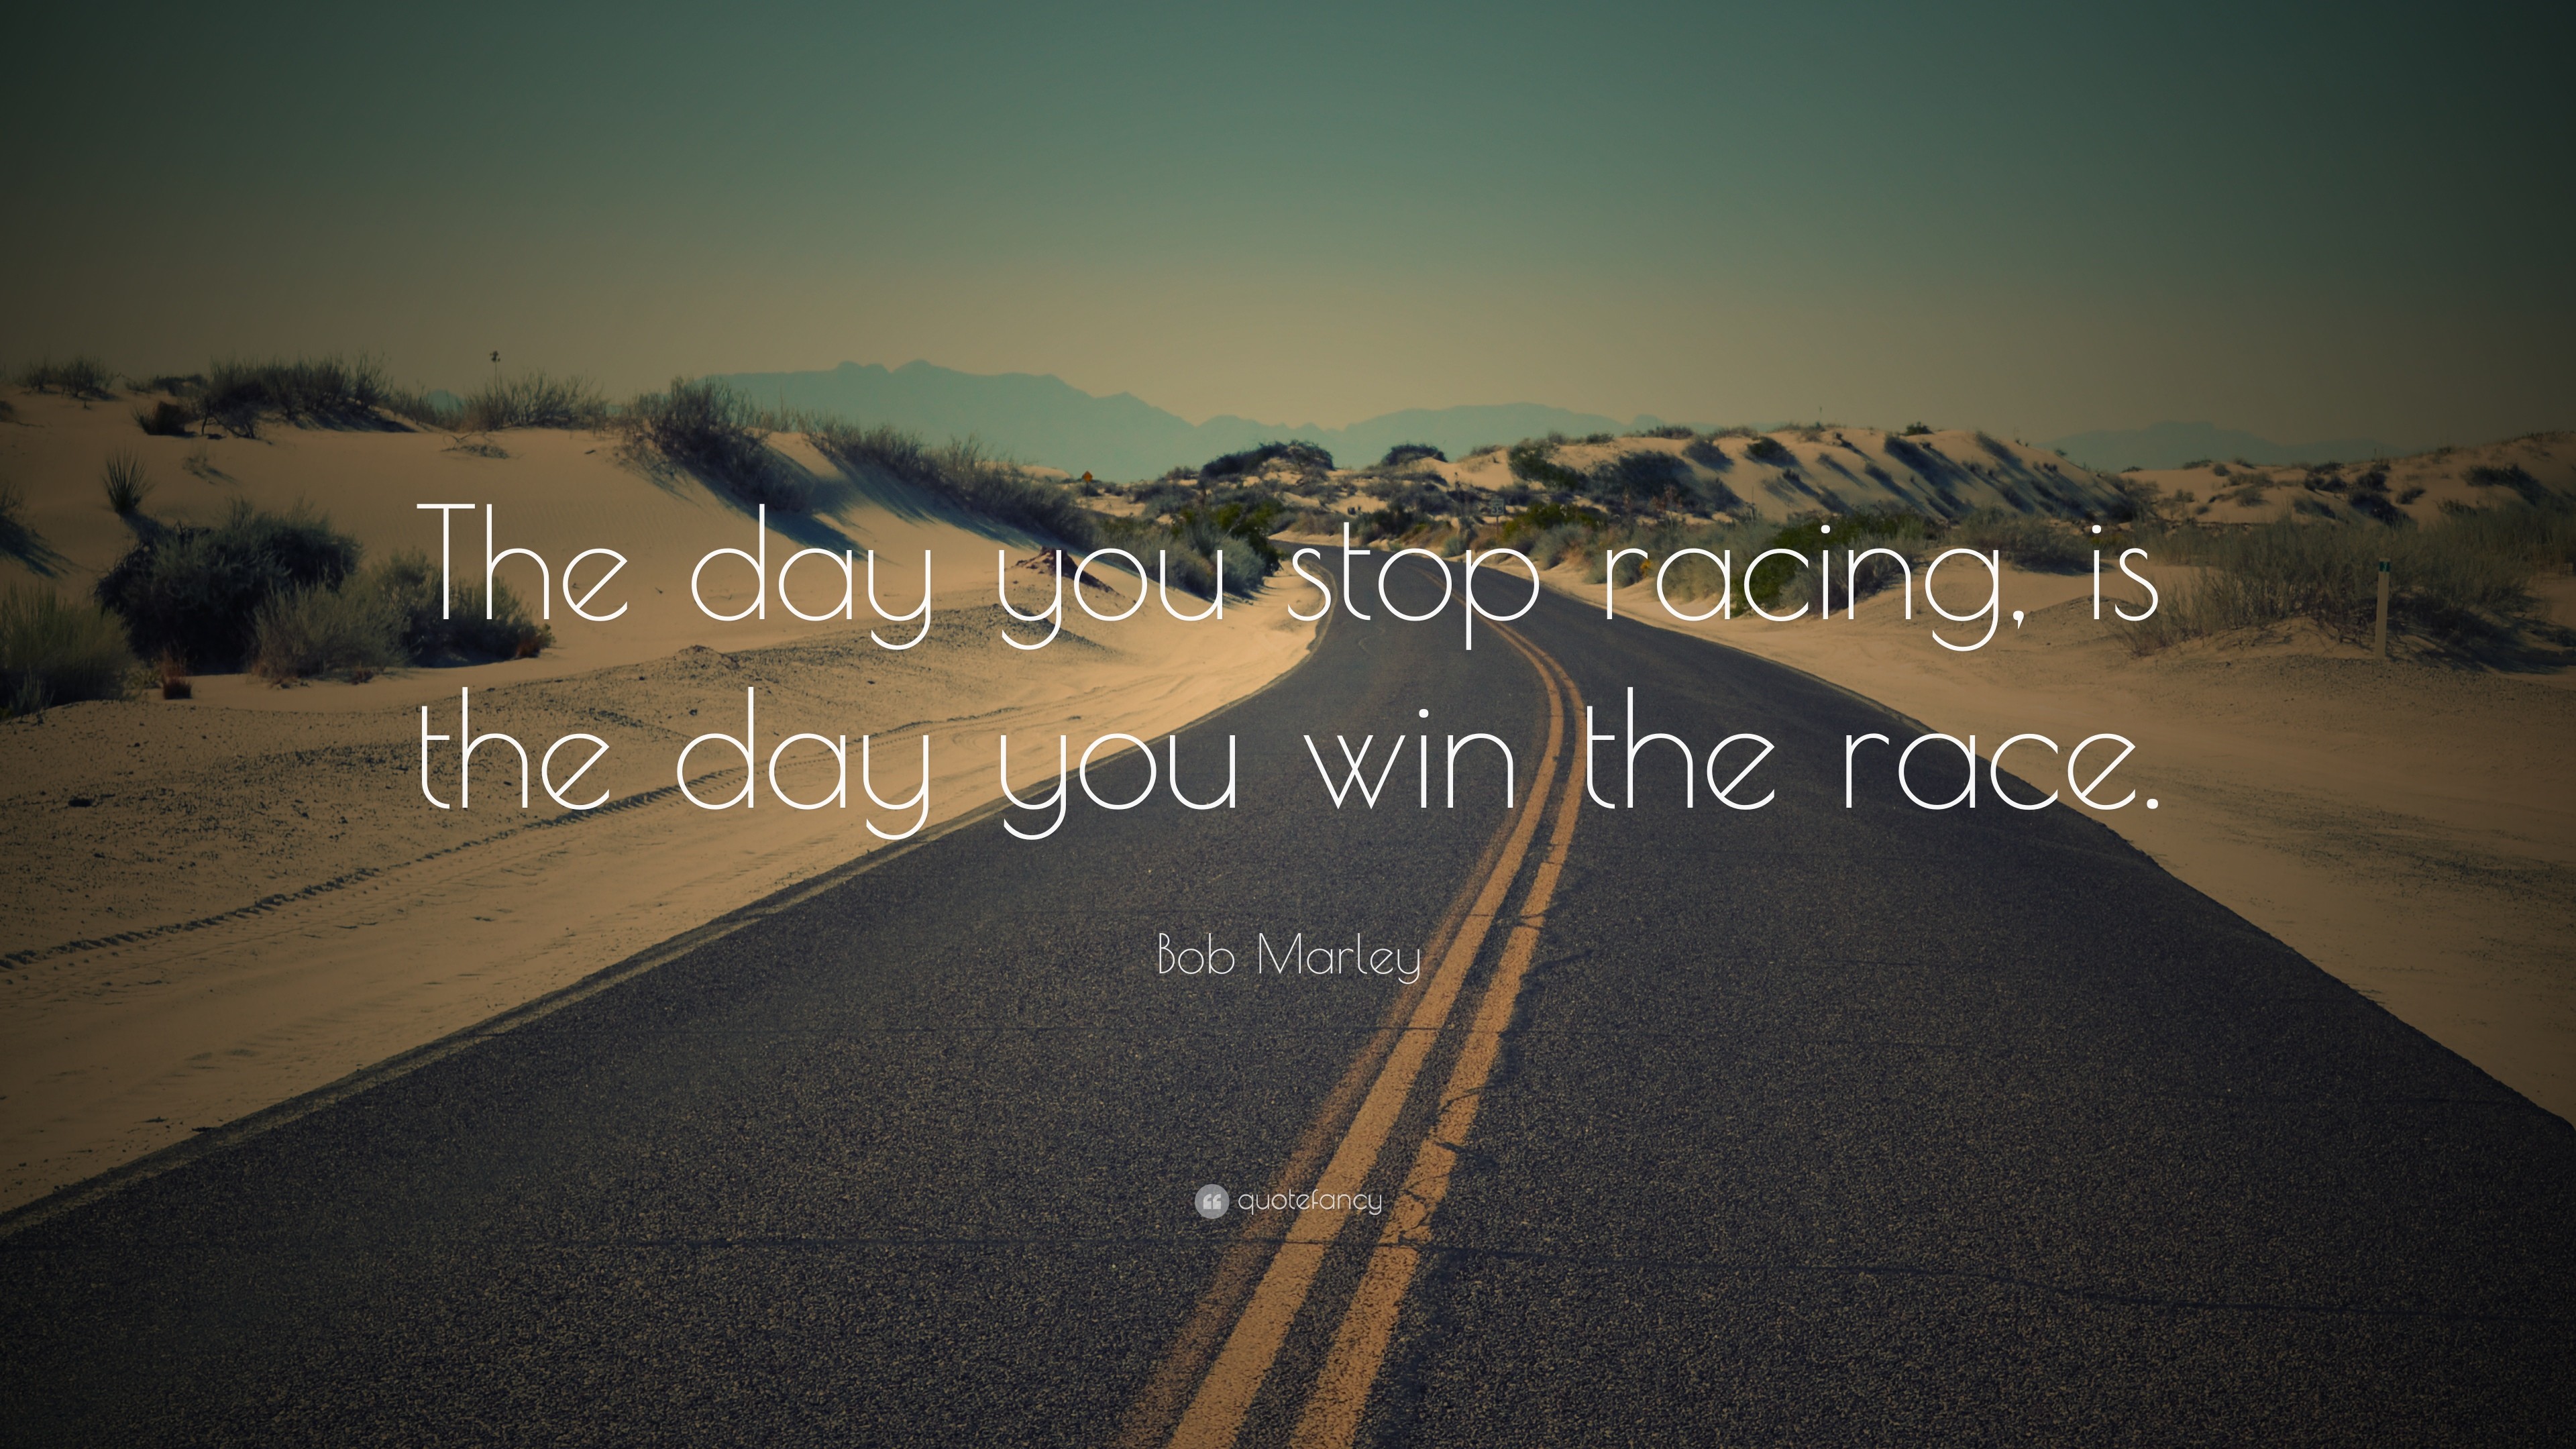 3840x2160 Bob Marley Quote: “The day you stop racing, is the day you win